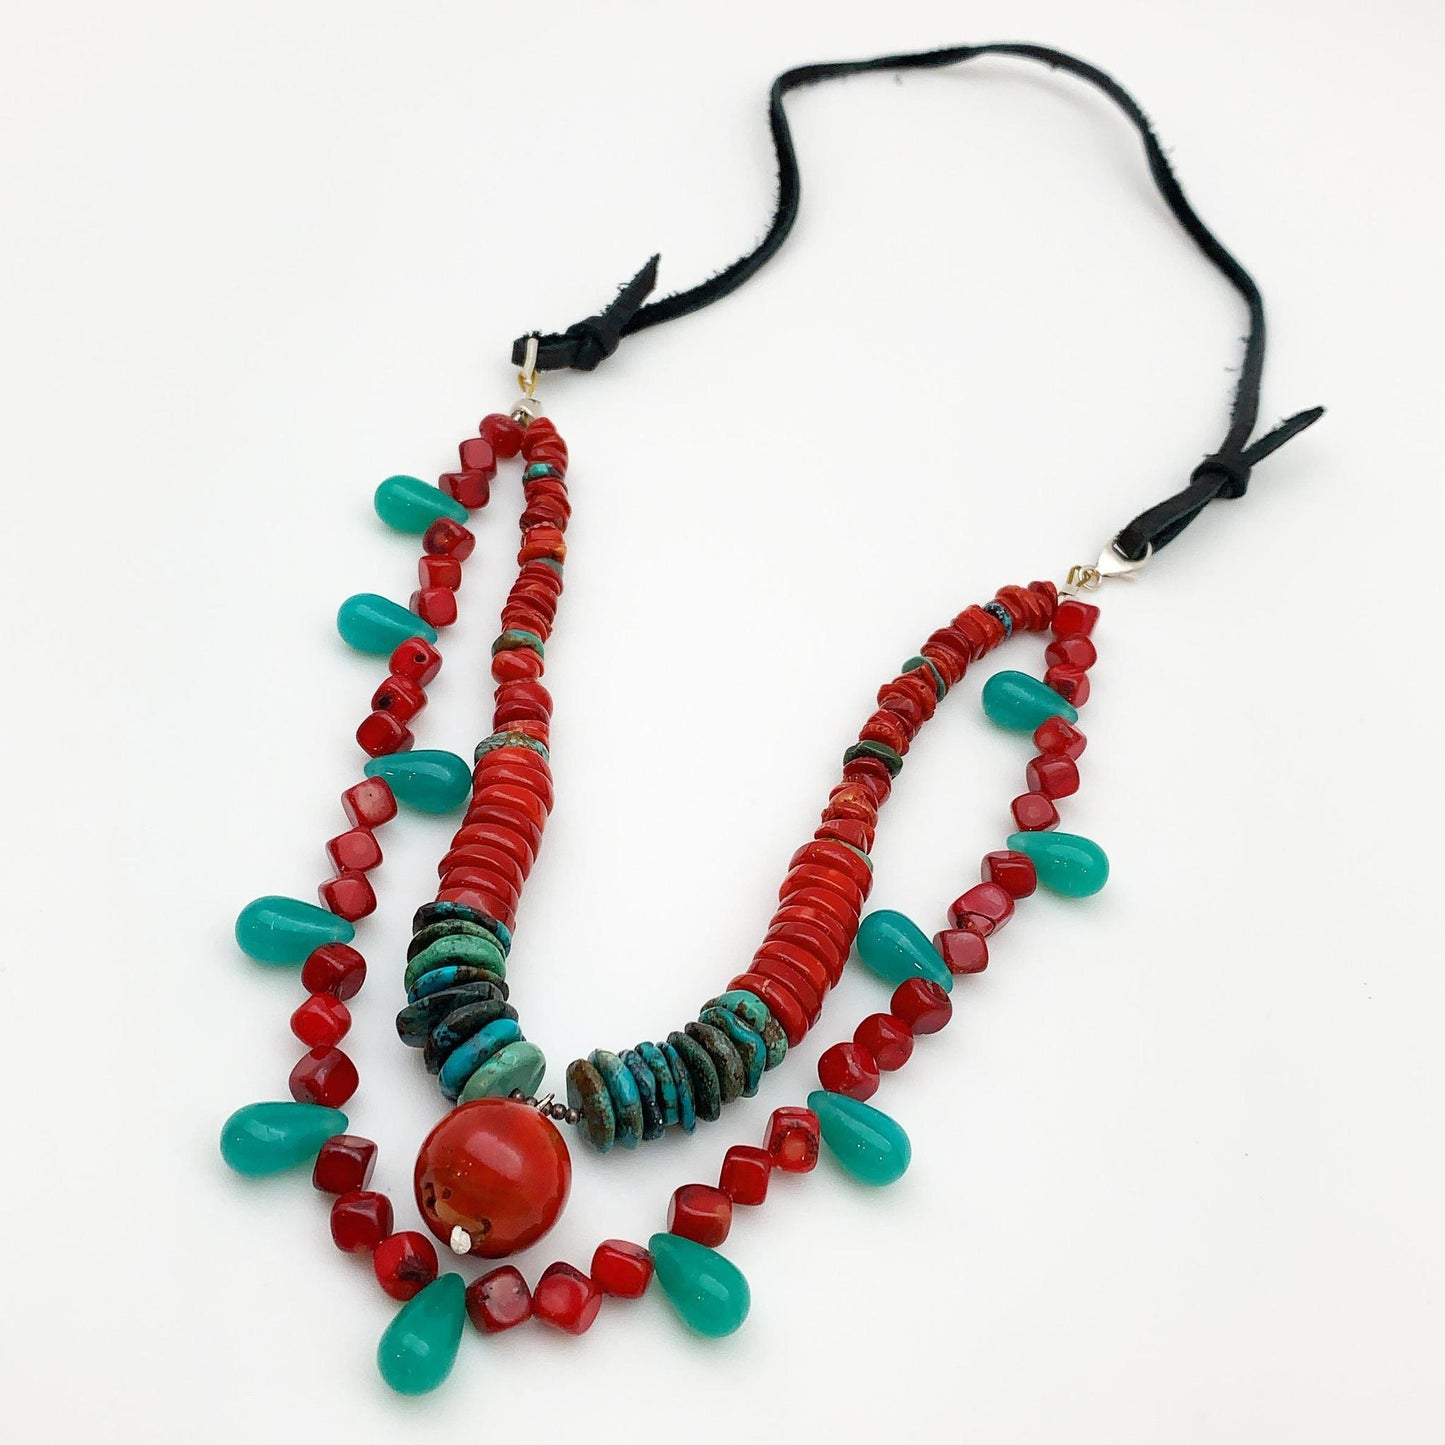 Necklace - Two-Strand Stone and Leather